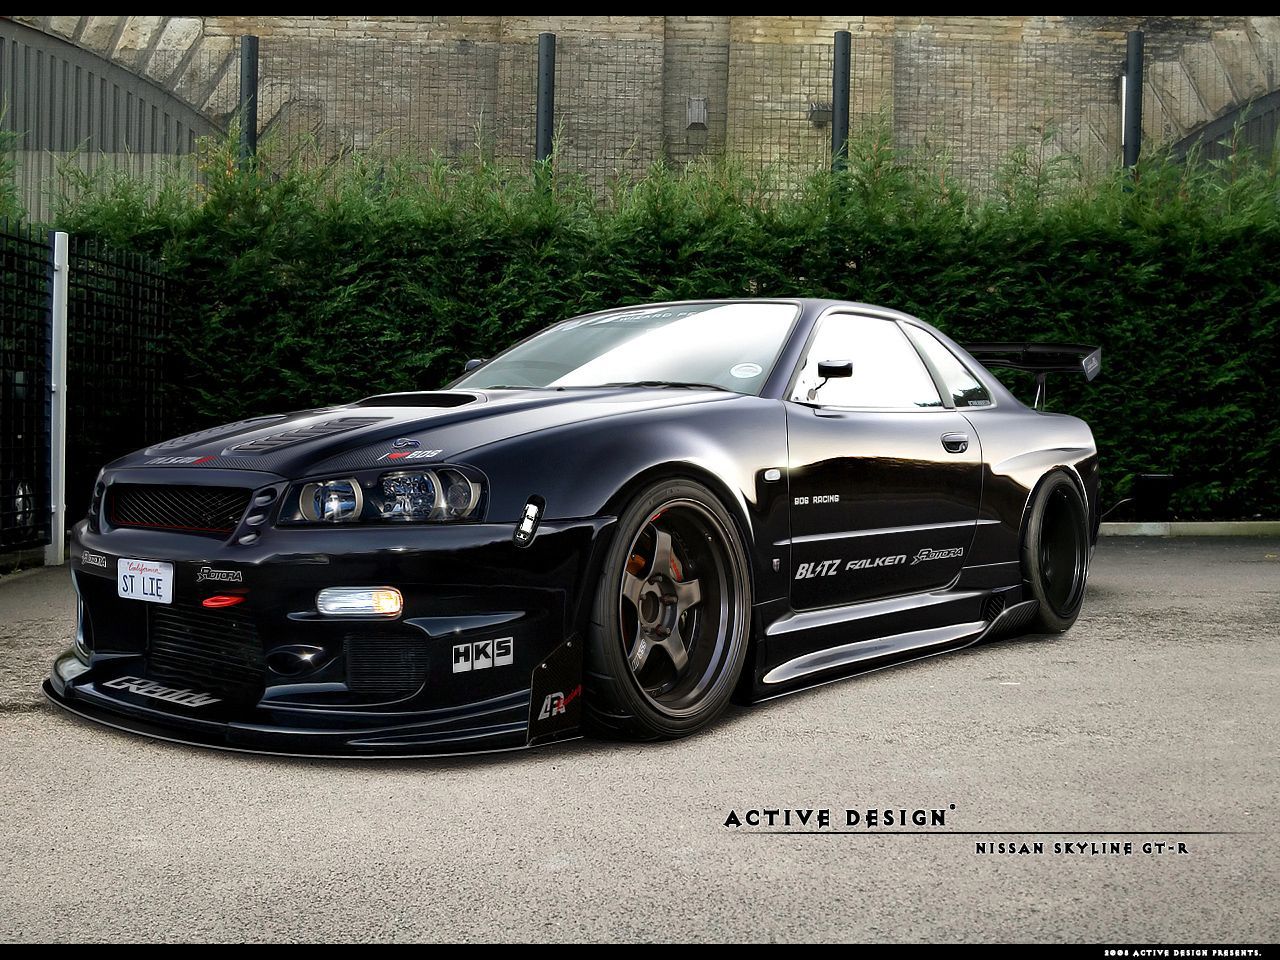 Nissan Skyline R34. Want to drive one of these or own one. Skyline gtr, Nissan skyline, Skyline gtr r34